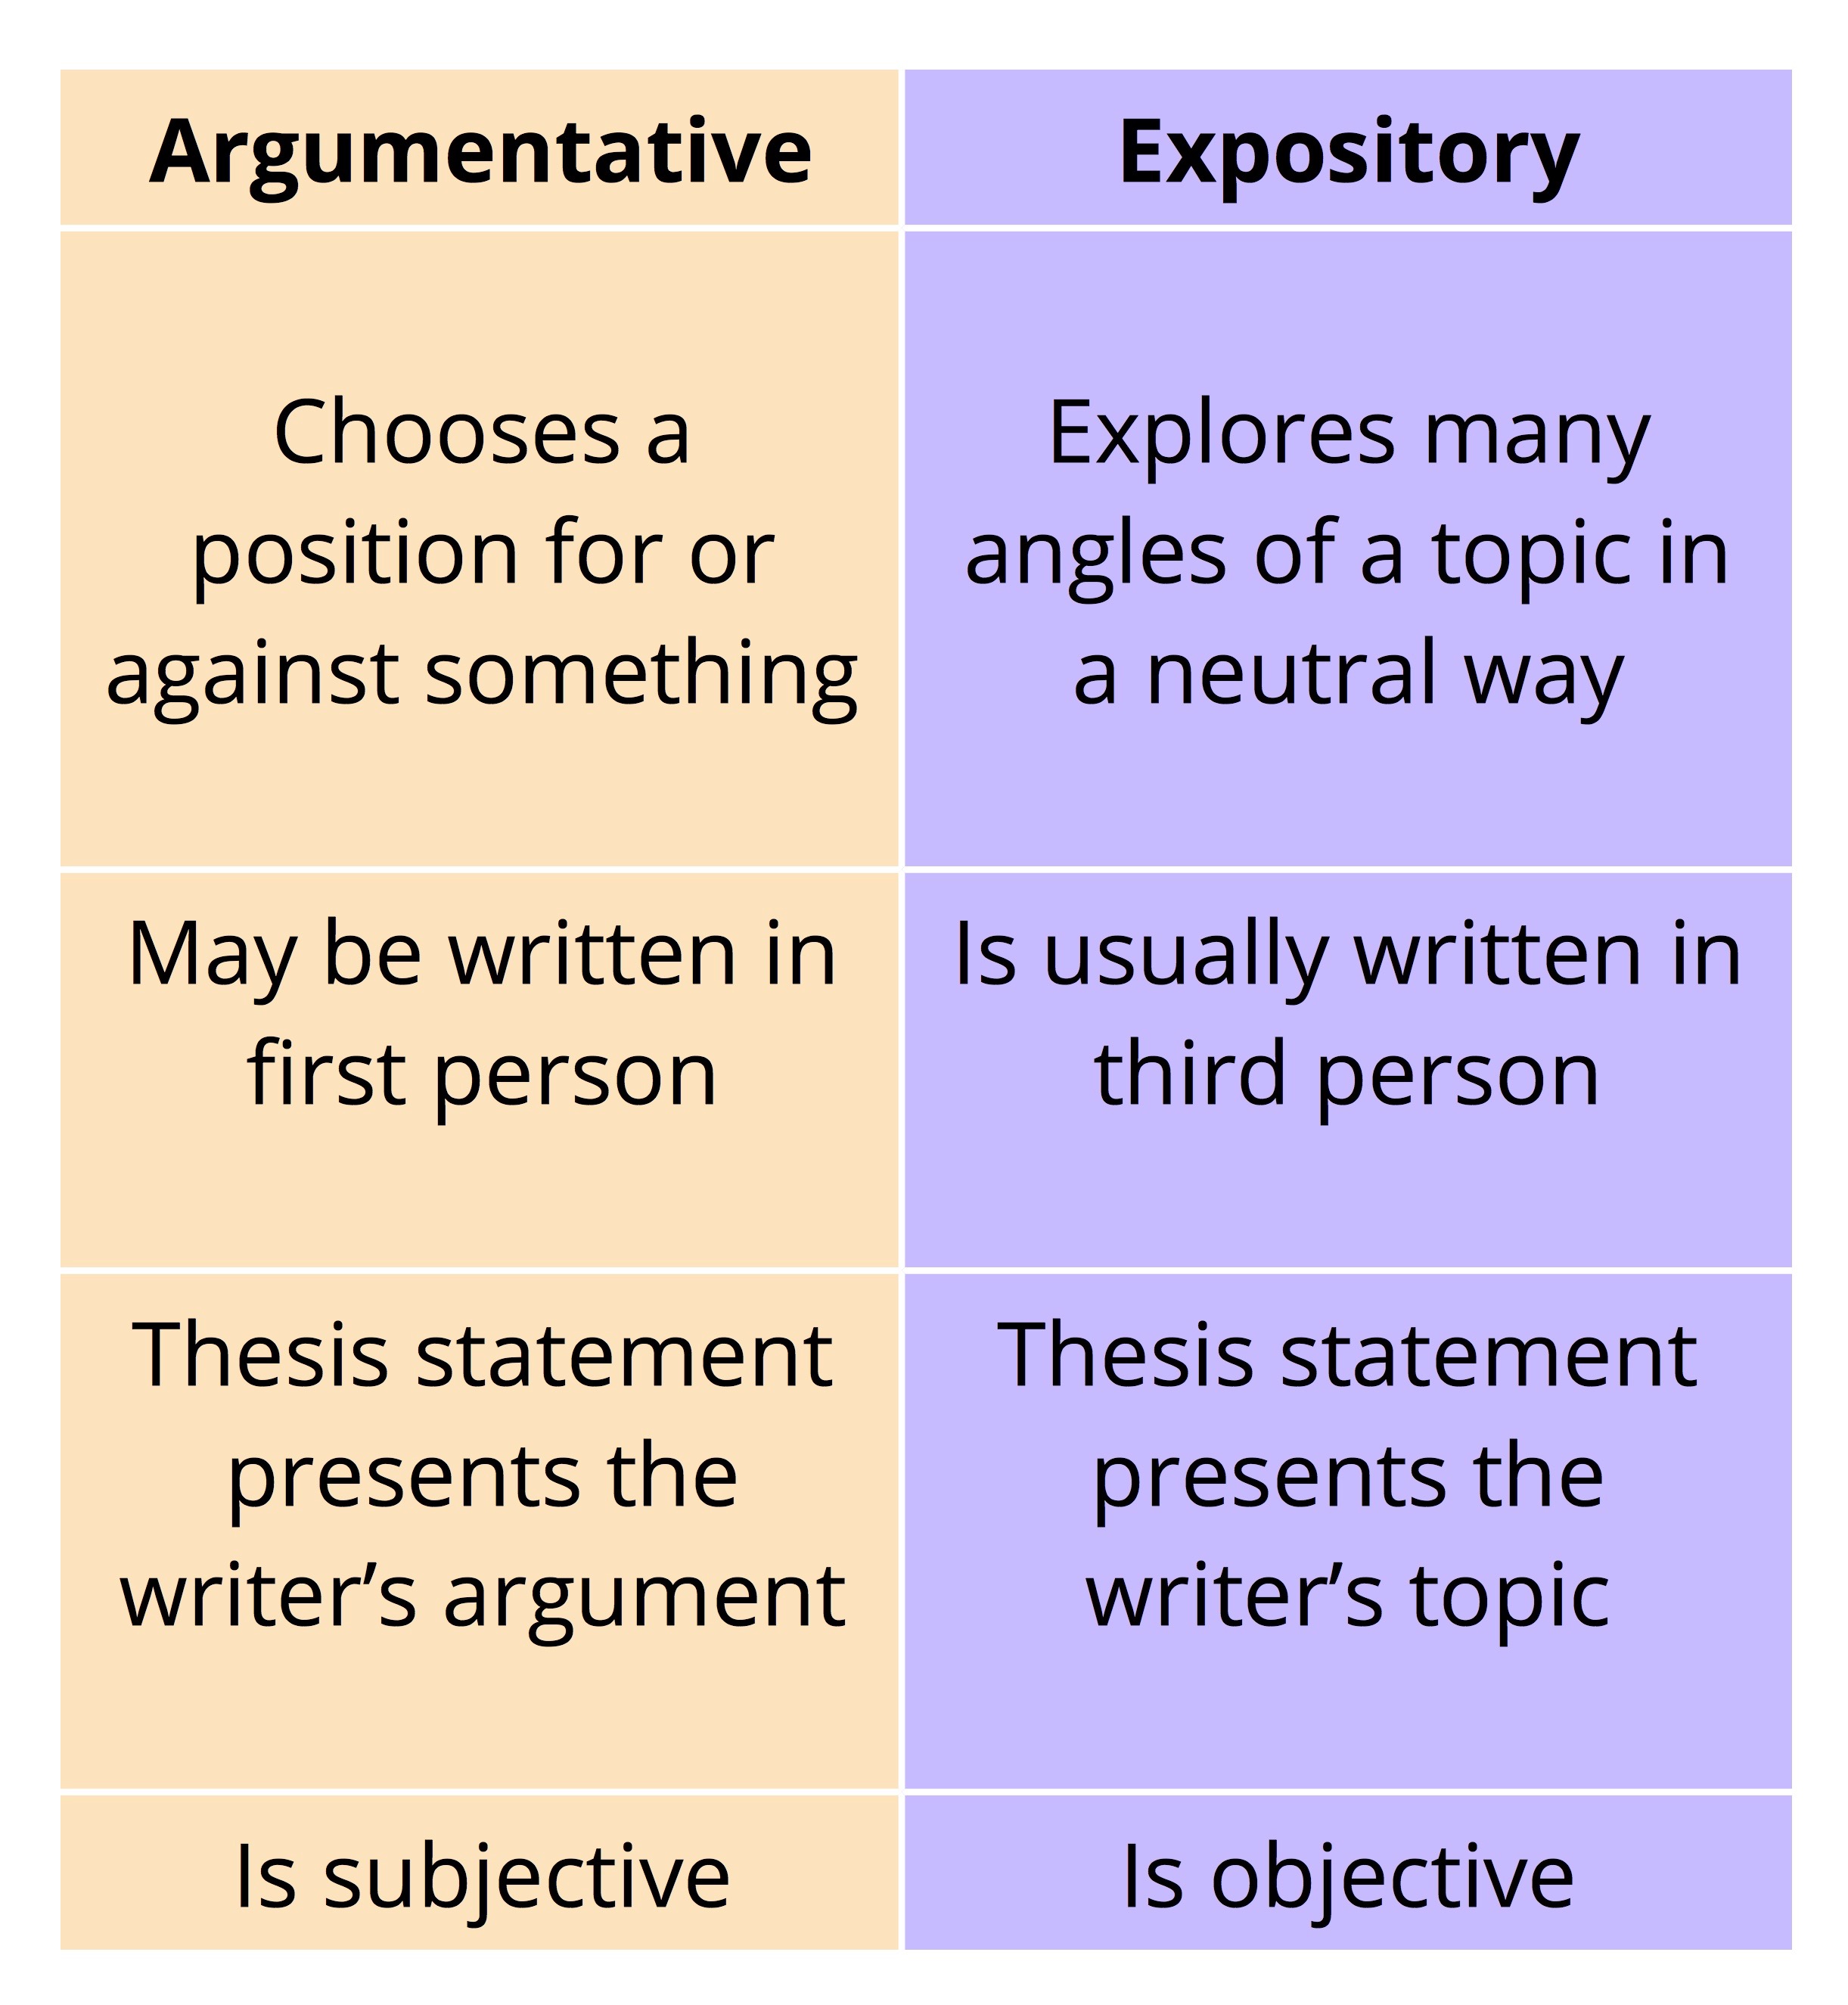 what is the difference between expository and argumentative essay